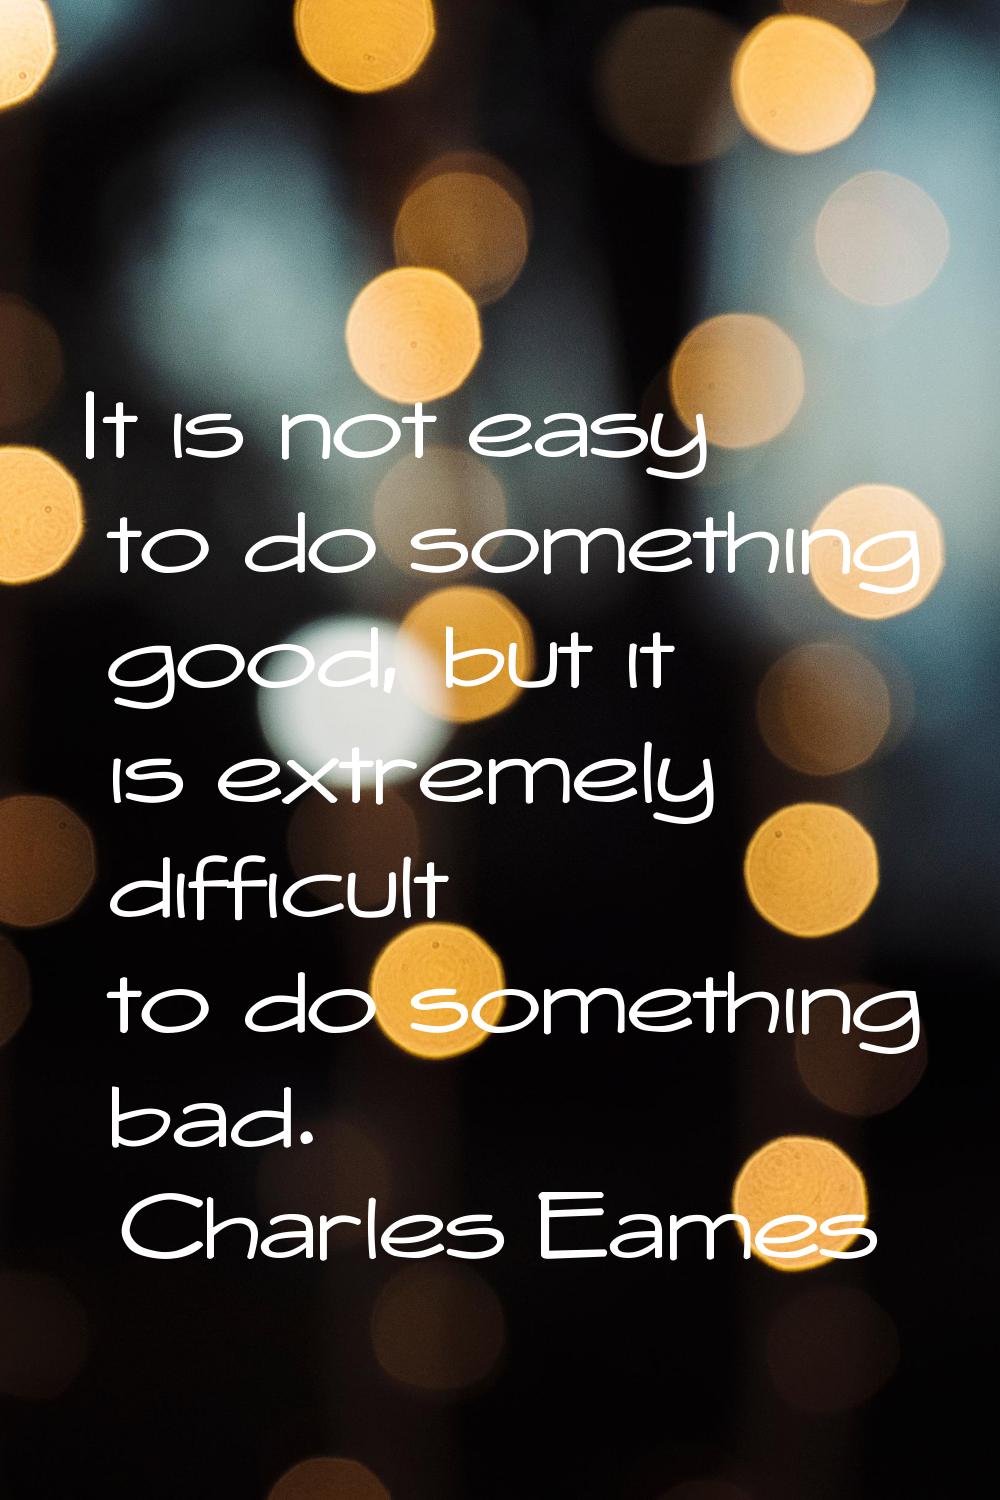 It is not easy to do something good, but it is extremely difficult to do something bad.